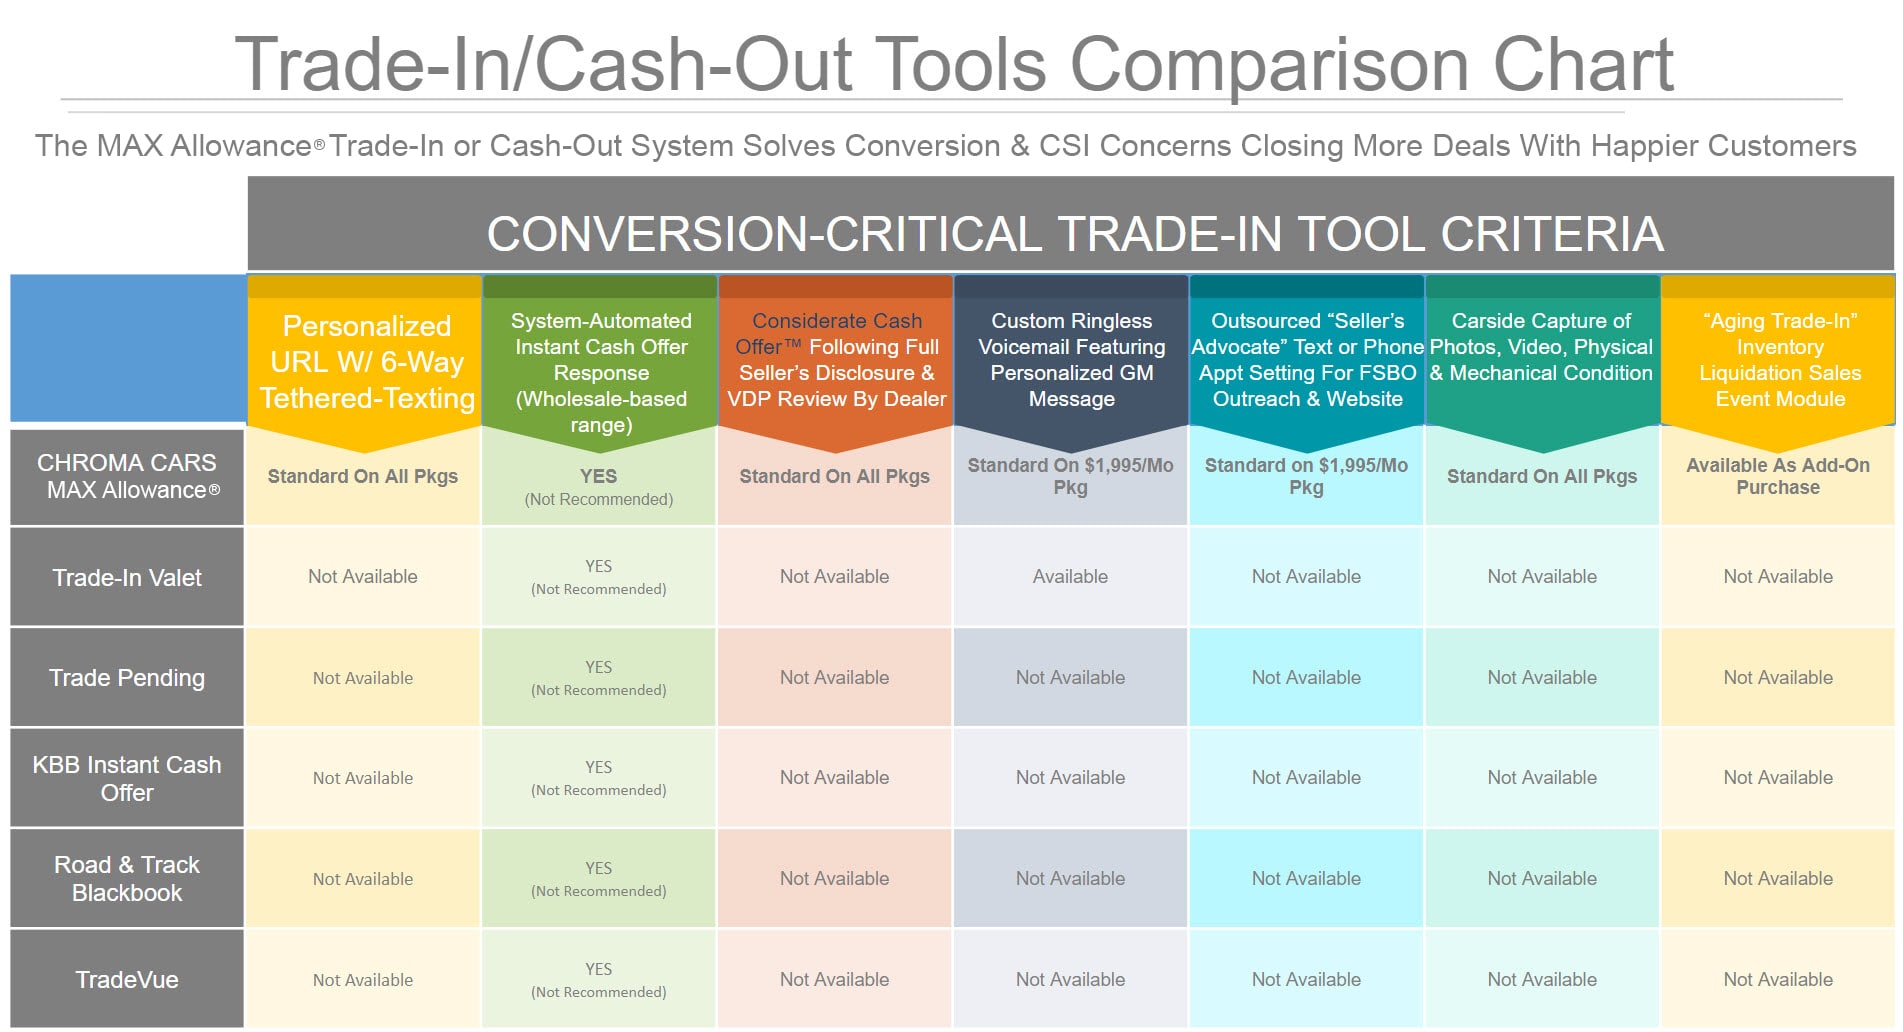 Trade-In/Cash-Out Tools Comparison Chart